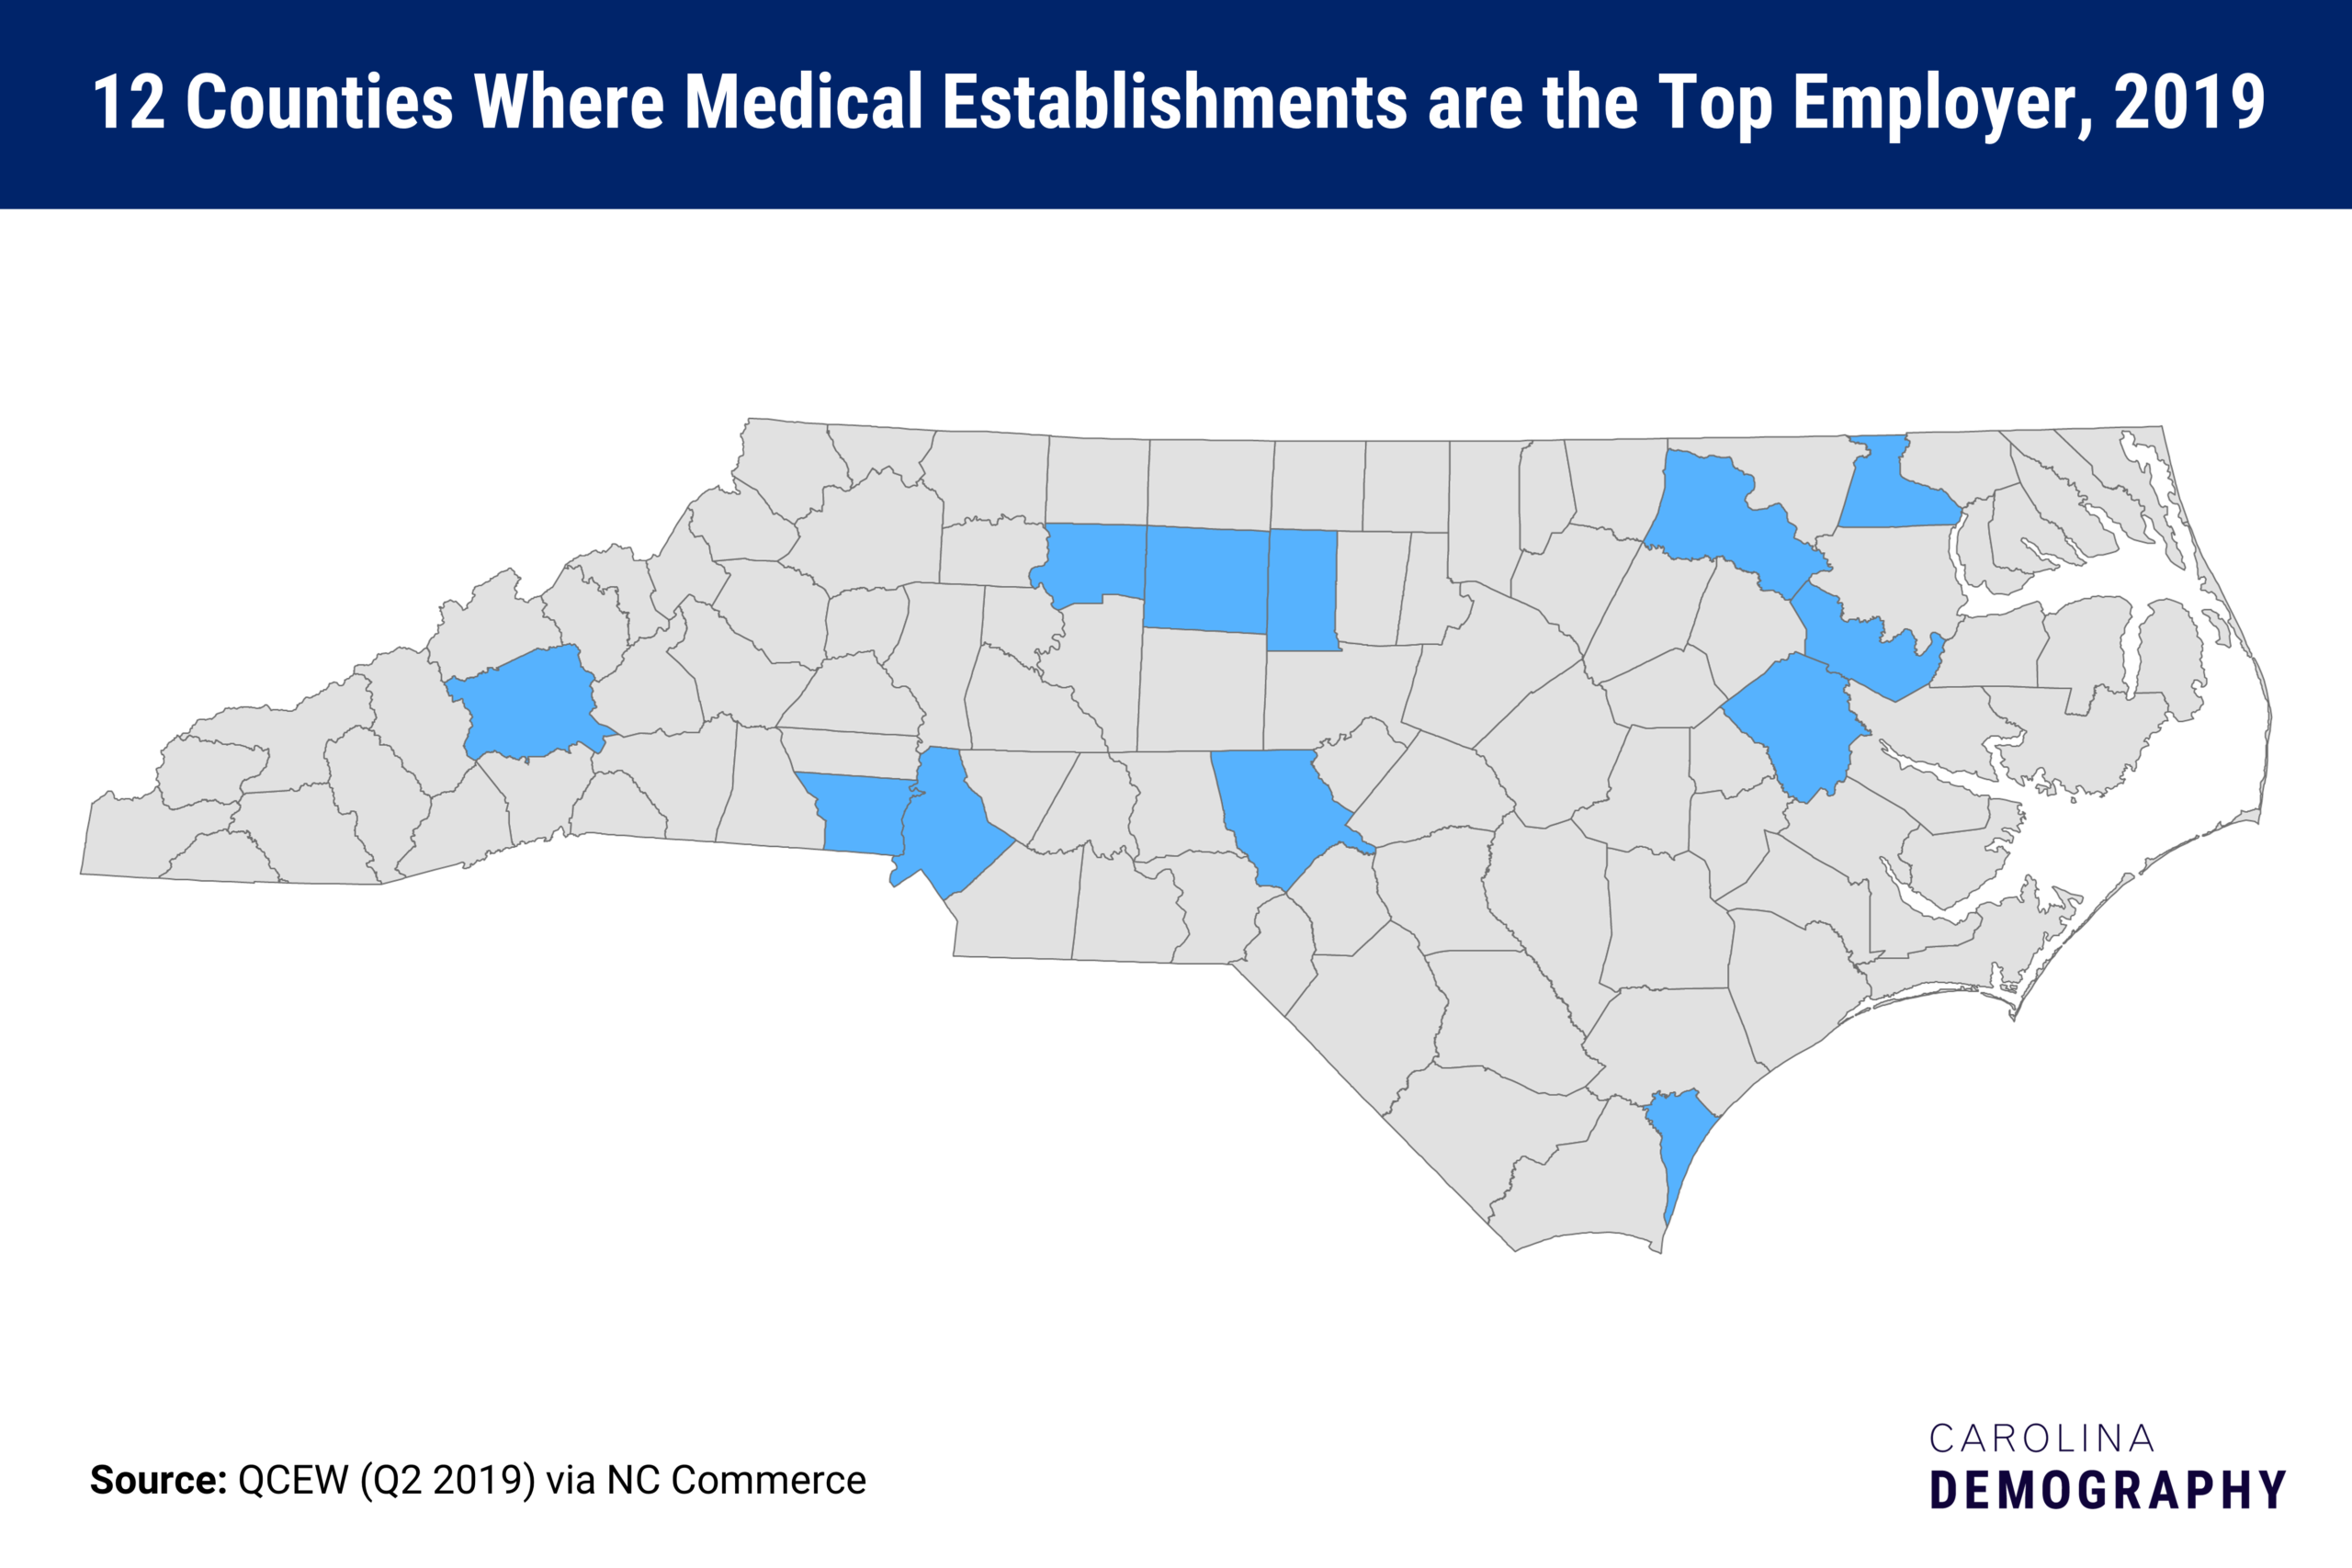 12 counties where medical establishments are the top employer, 2019